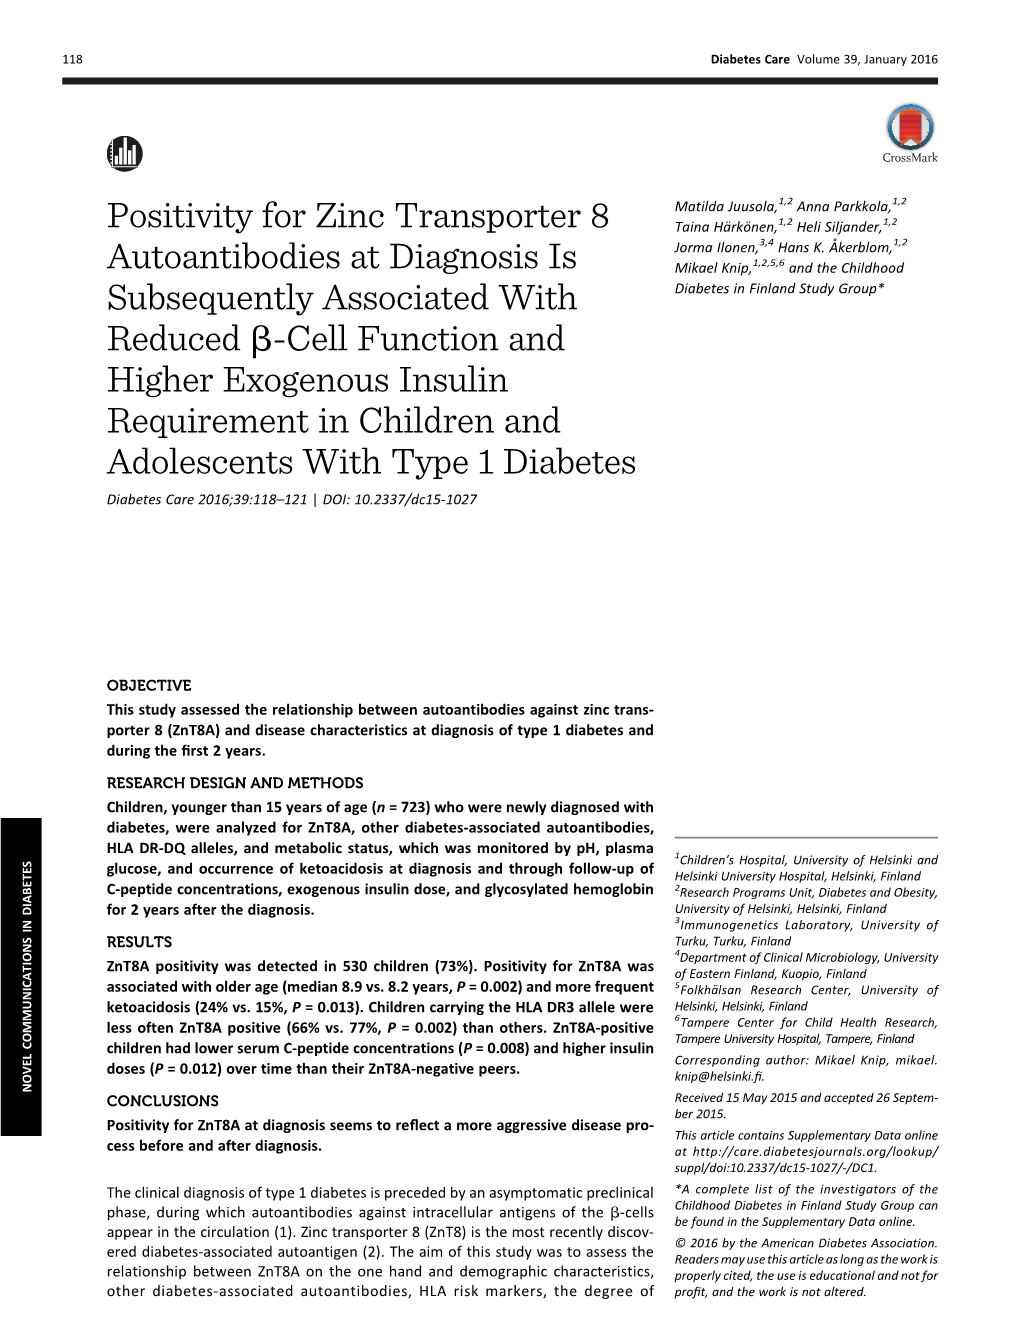 Positivity for Zinc Transporter 8 Autoantibodies at Diagnosis Is Subsequently Associated with Reduced B-Cell Function and Higher